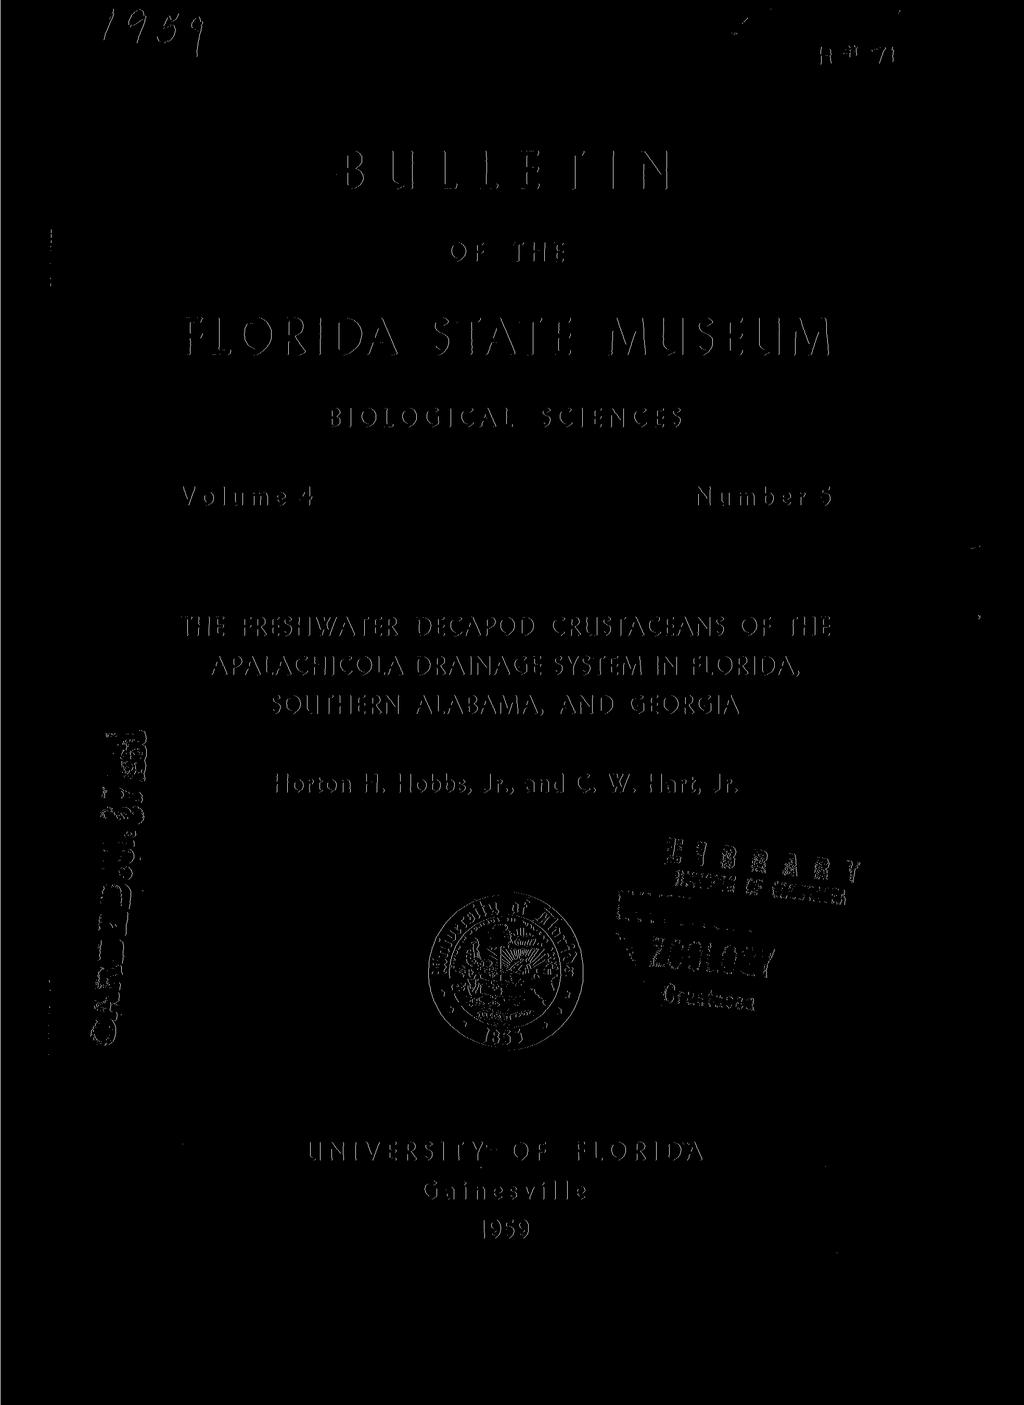 i c 15<\ H * 71 BULLETIN OF THE FLORIDA STATE MUSEUM BIOLOGICAL SCIENCES Volume 4 Number 5 THE FRESHWATER DECAPOD CRUSTACEANS OF THE APALACHICOLA DRAINAGE SYSTEM